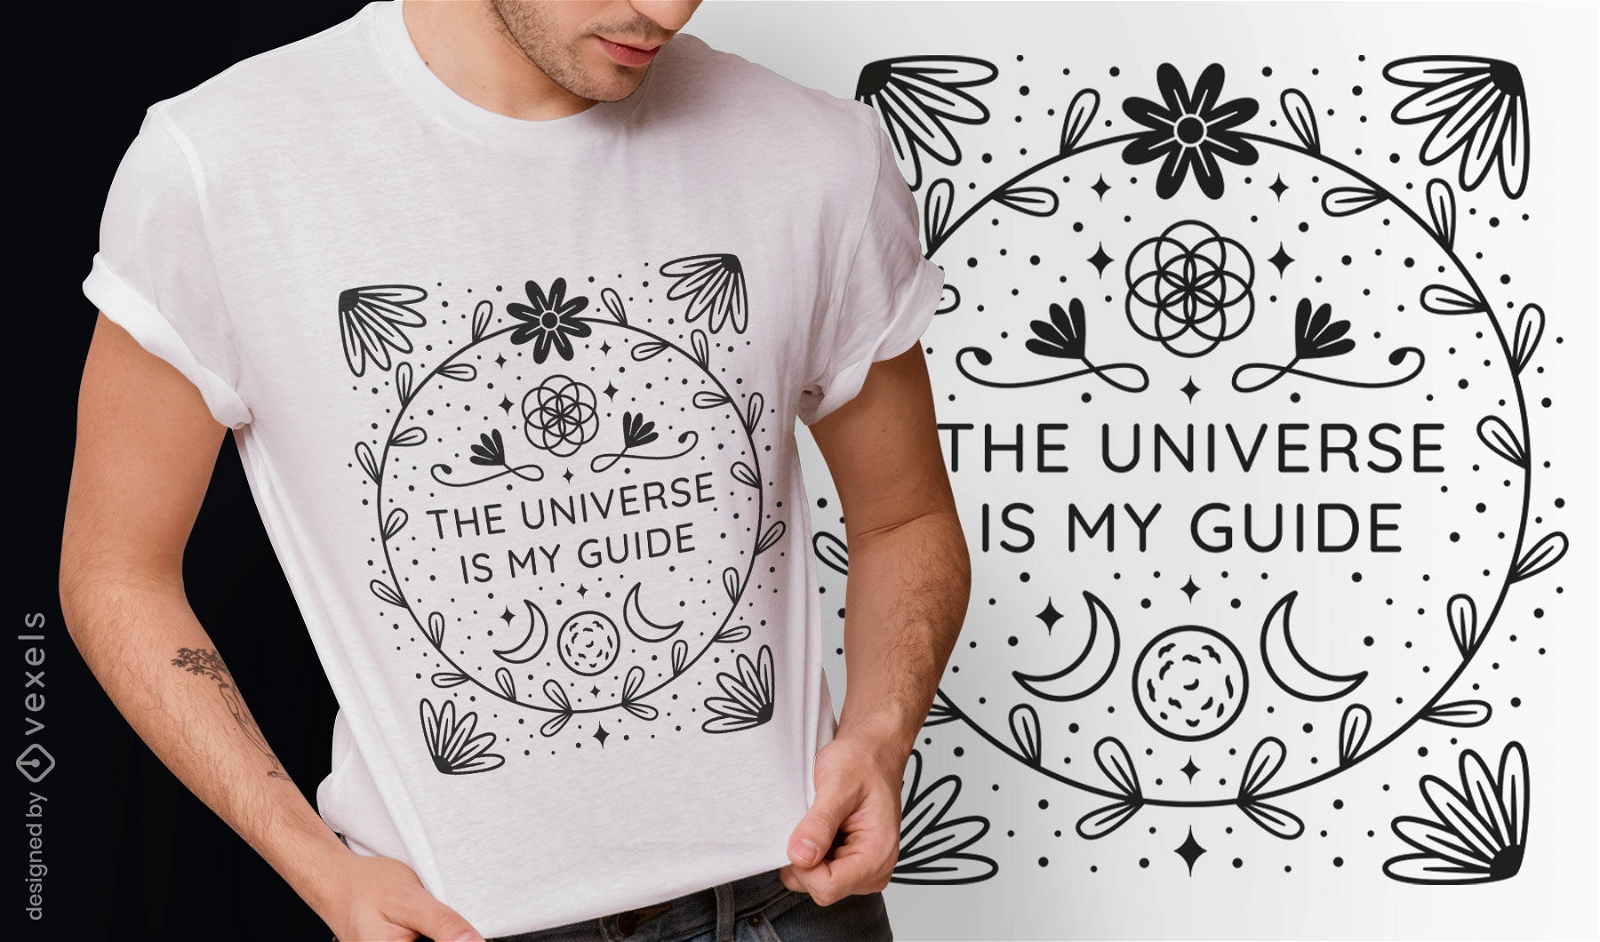 The universe is my guide t-shirt design